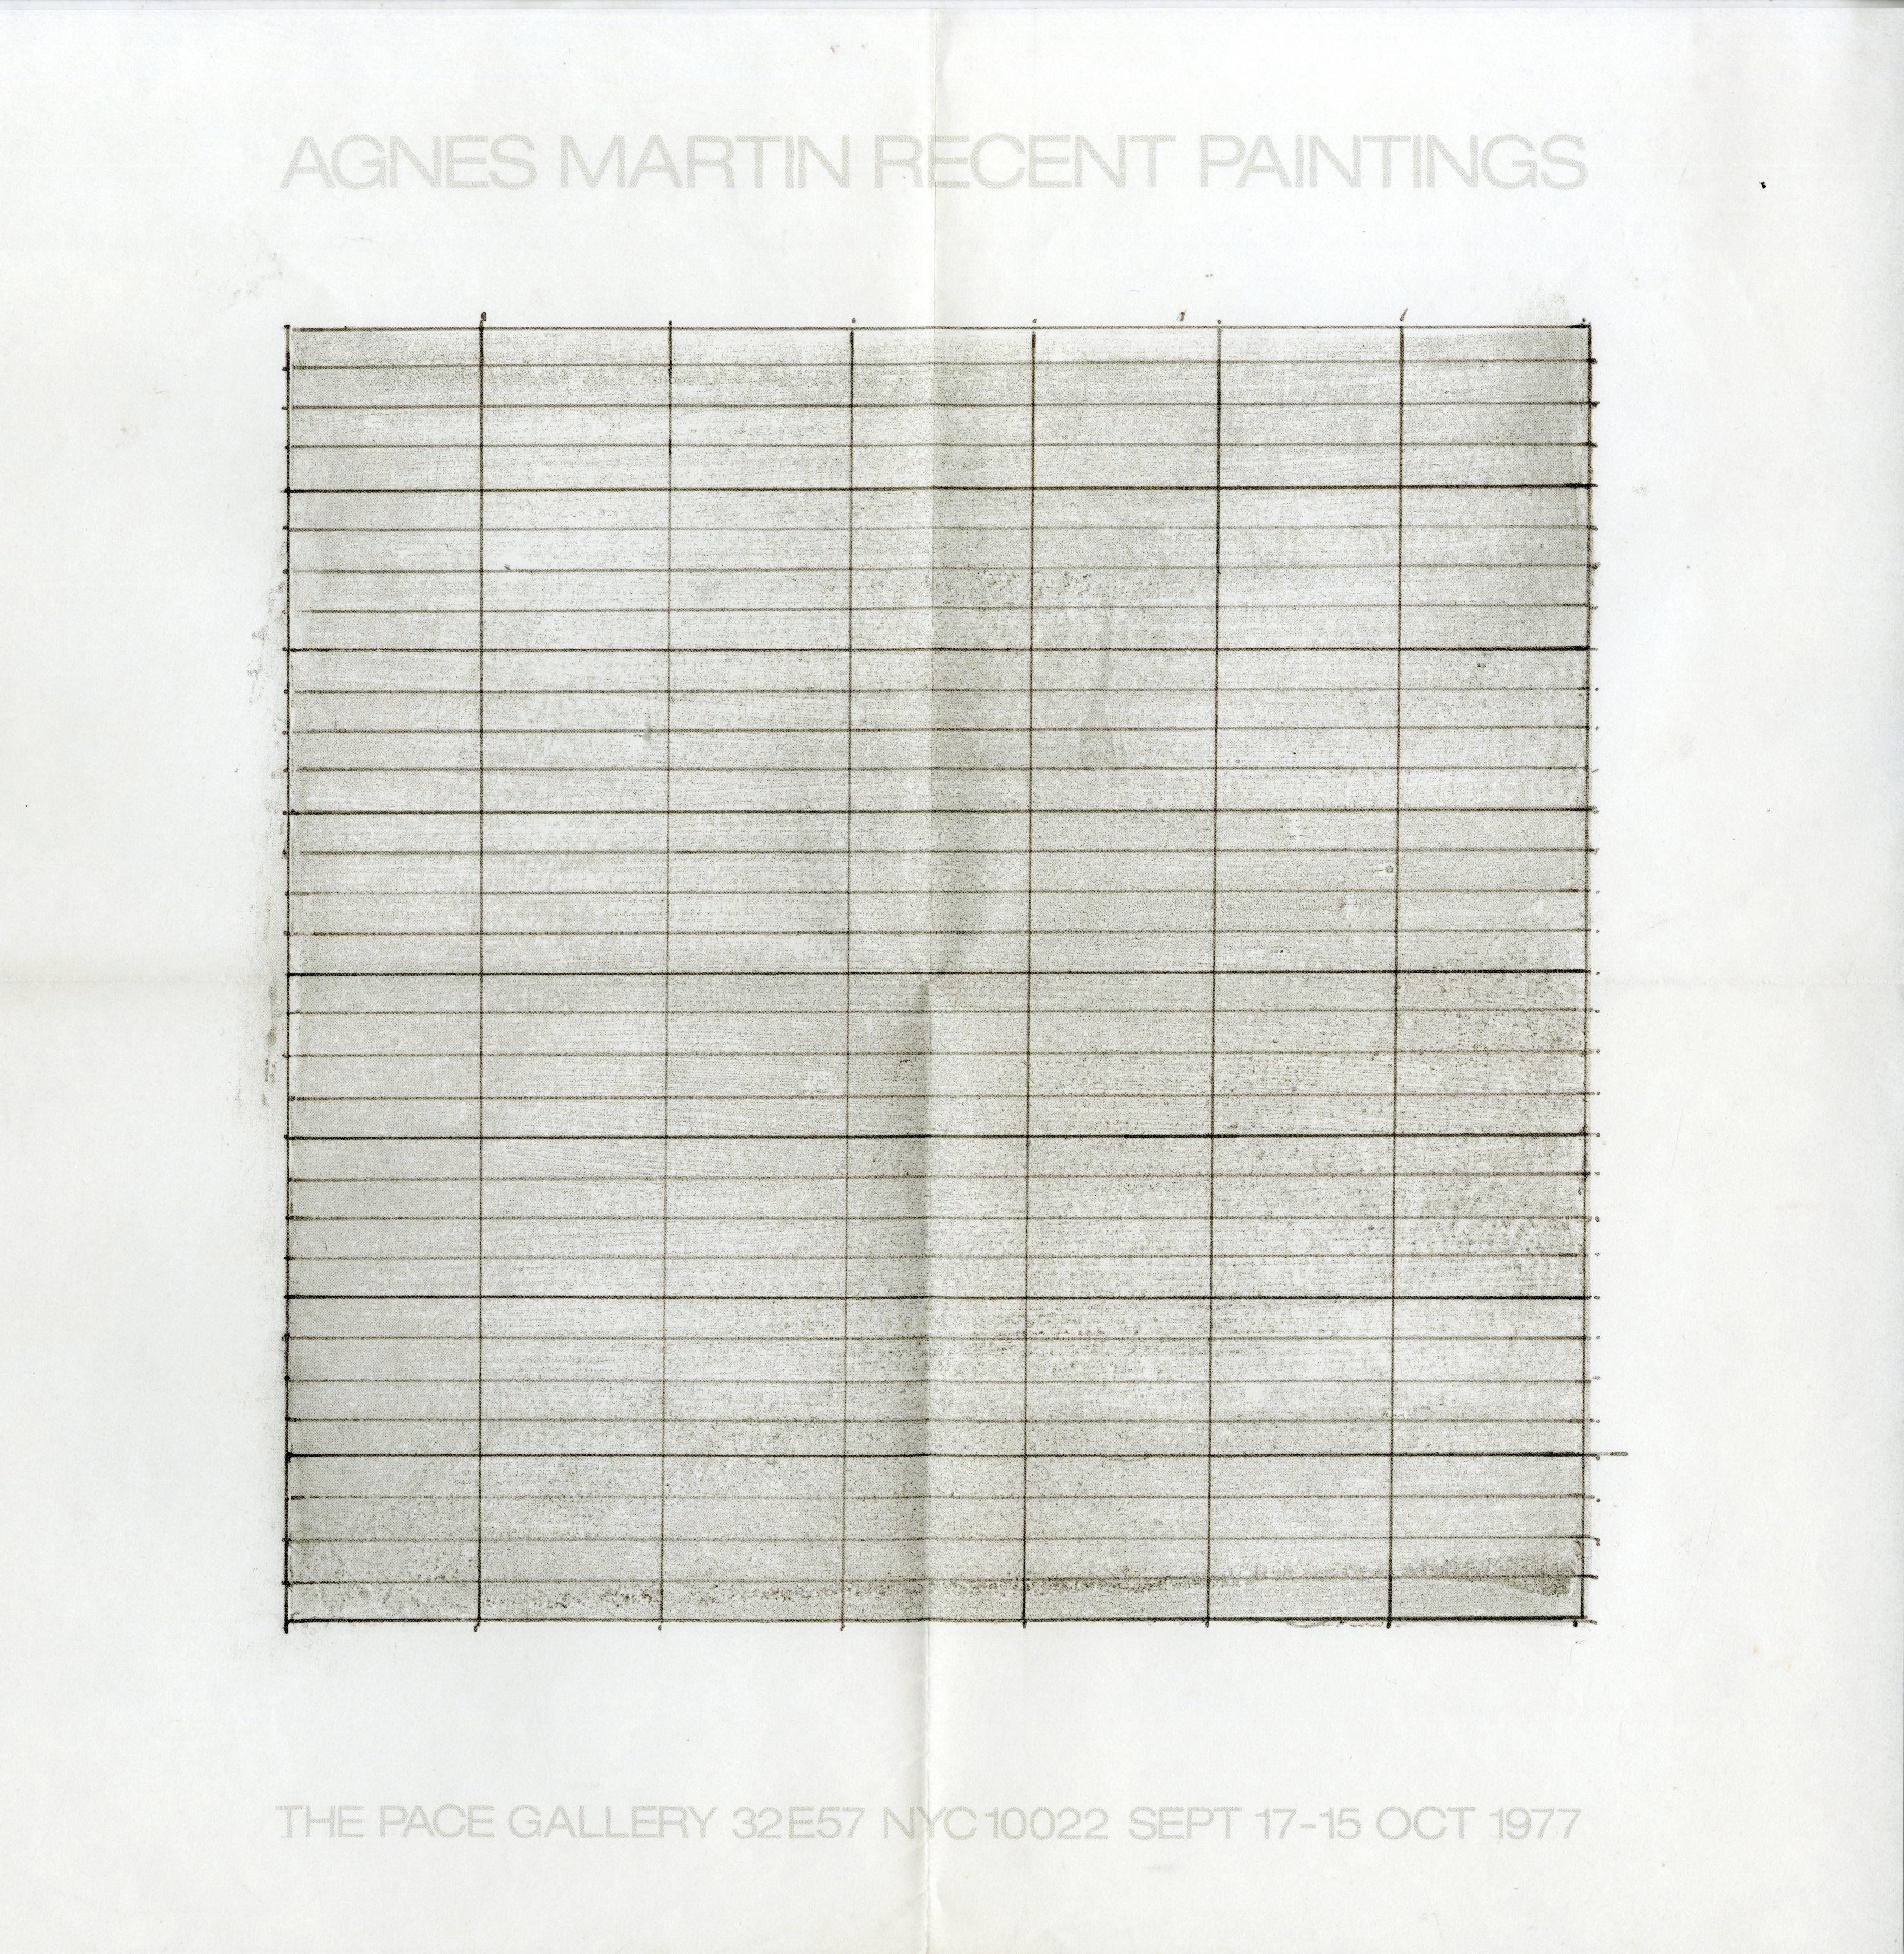 Agnes Martin Recent Paintings Limited Edition 1977 PACE Gallery invite sur vellum